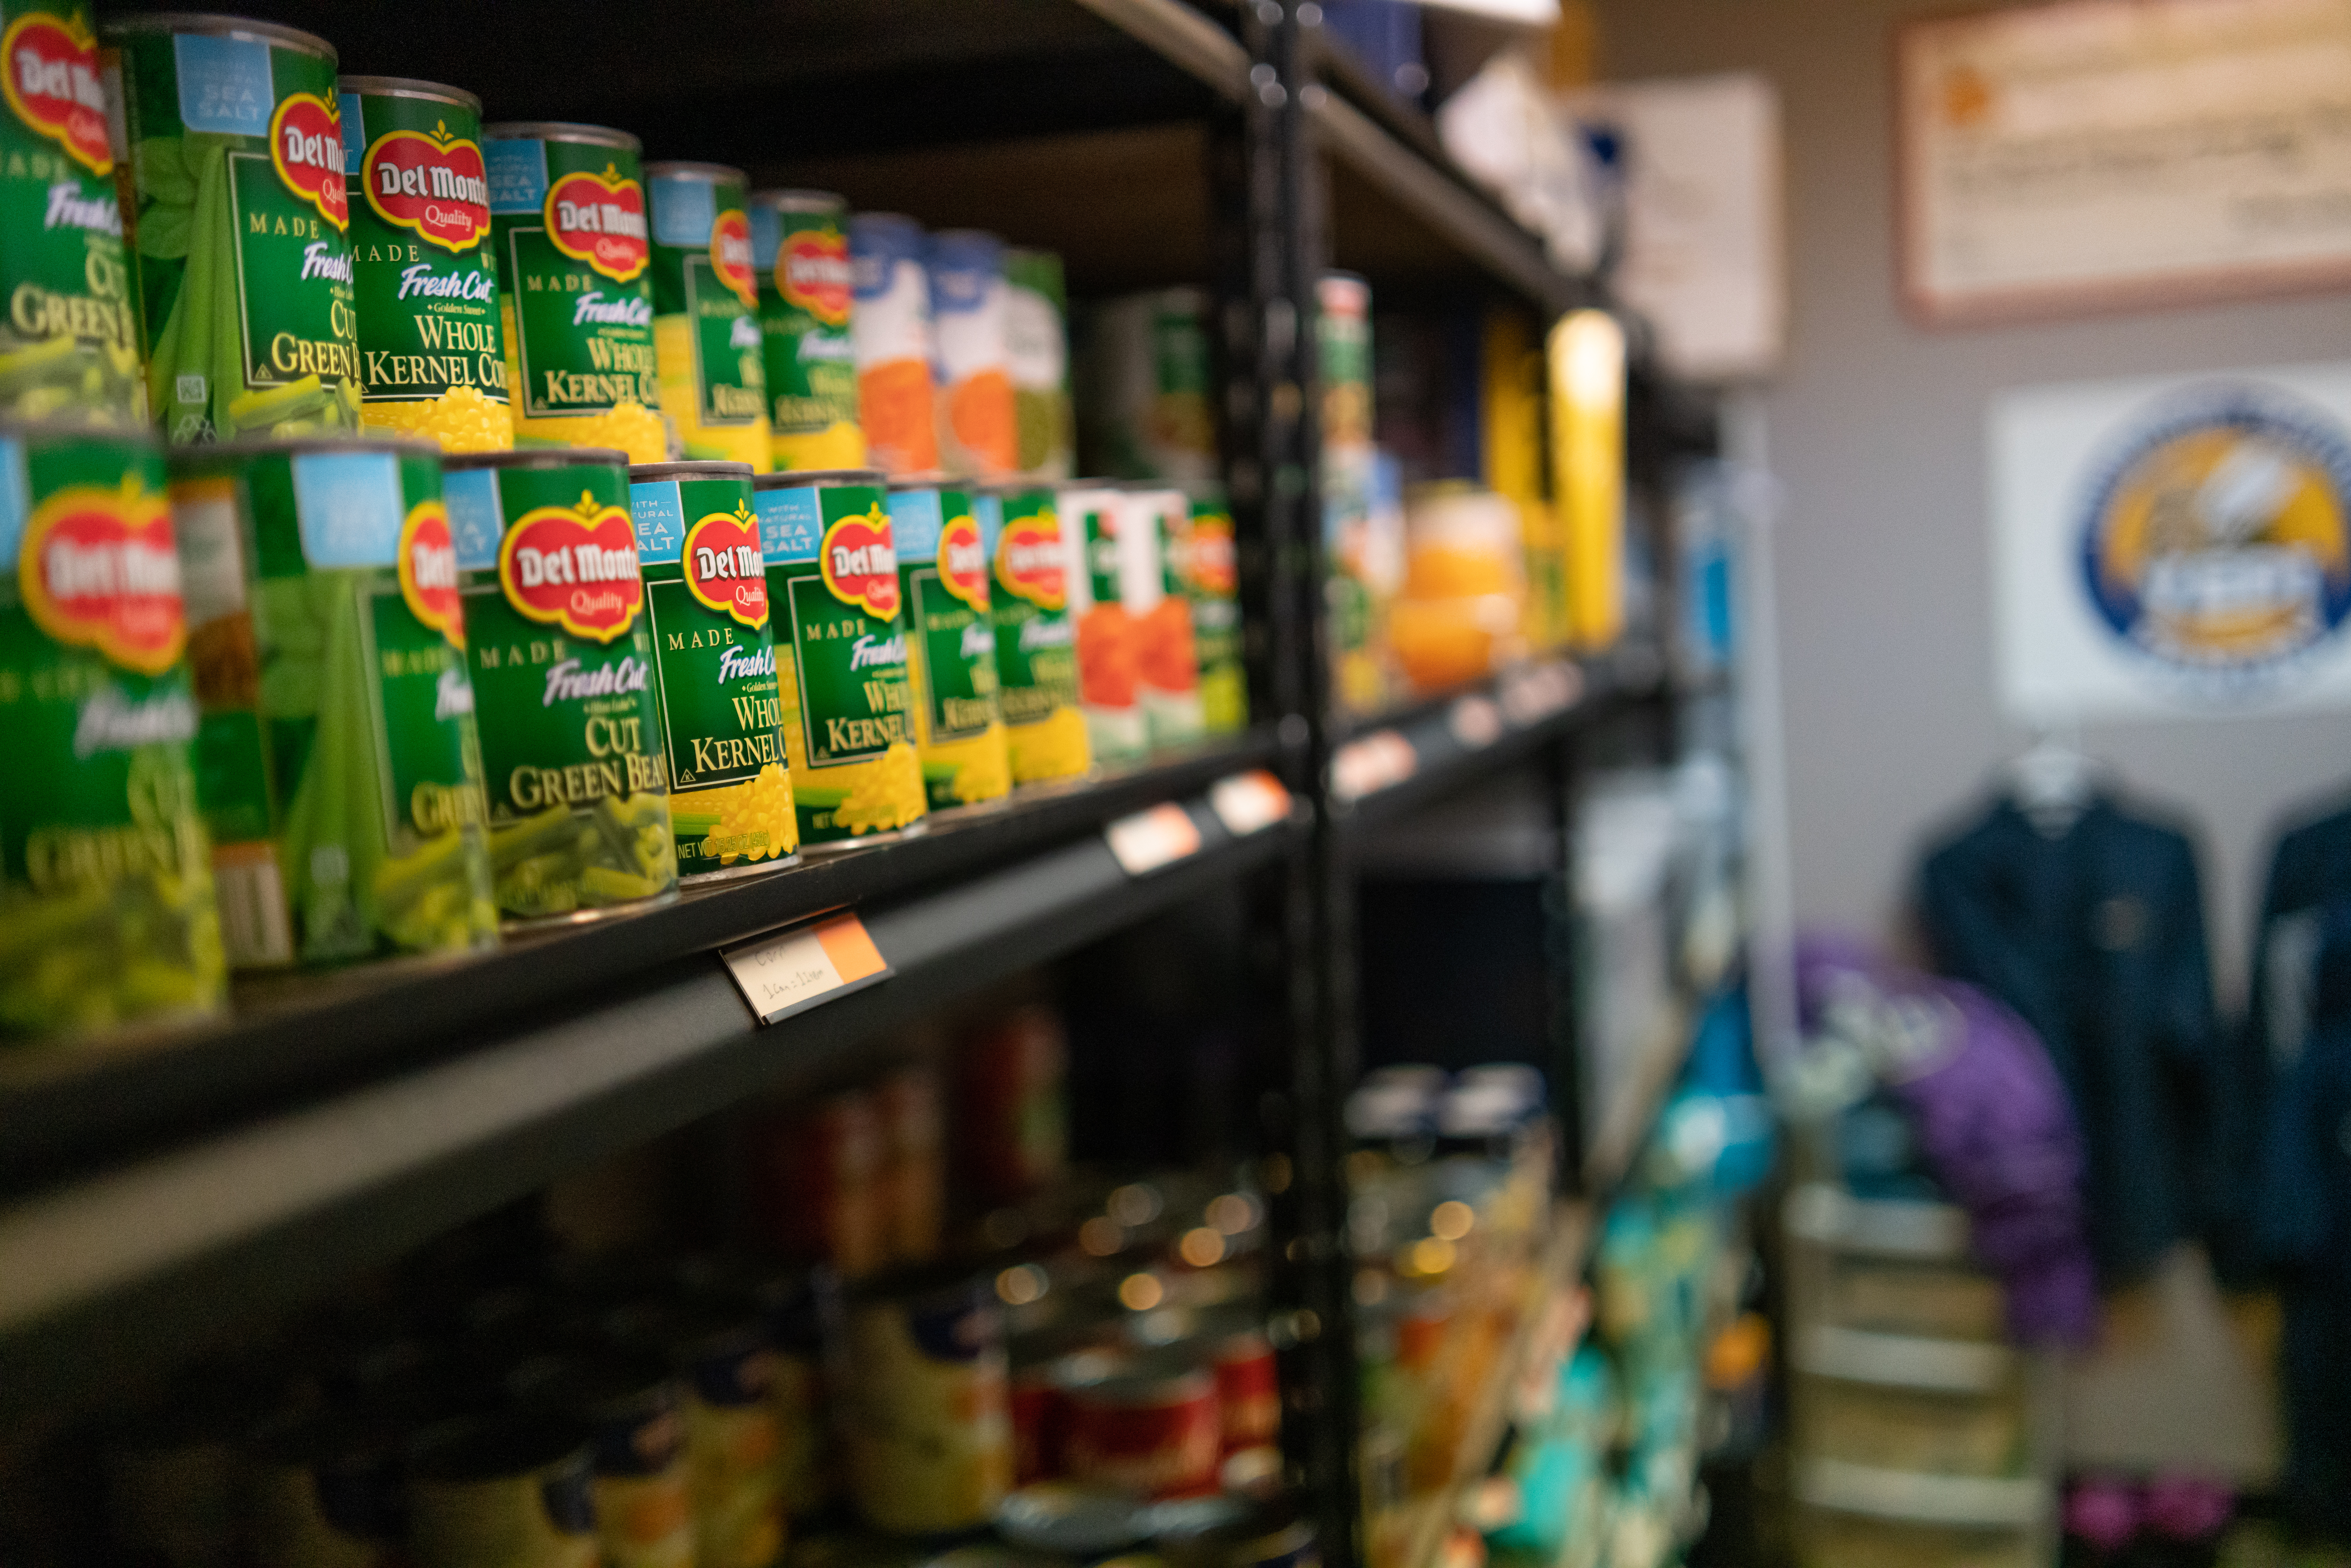 The YEP is our on-campus pantry, used by students, faculty & staff persons who could benefit from a hand-up saving money, eating nutritiously, meeting basic needs and succeeding academically.